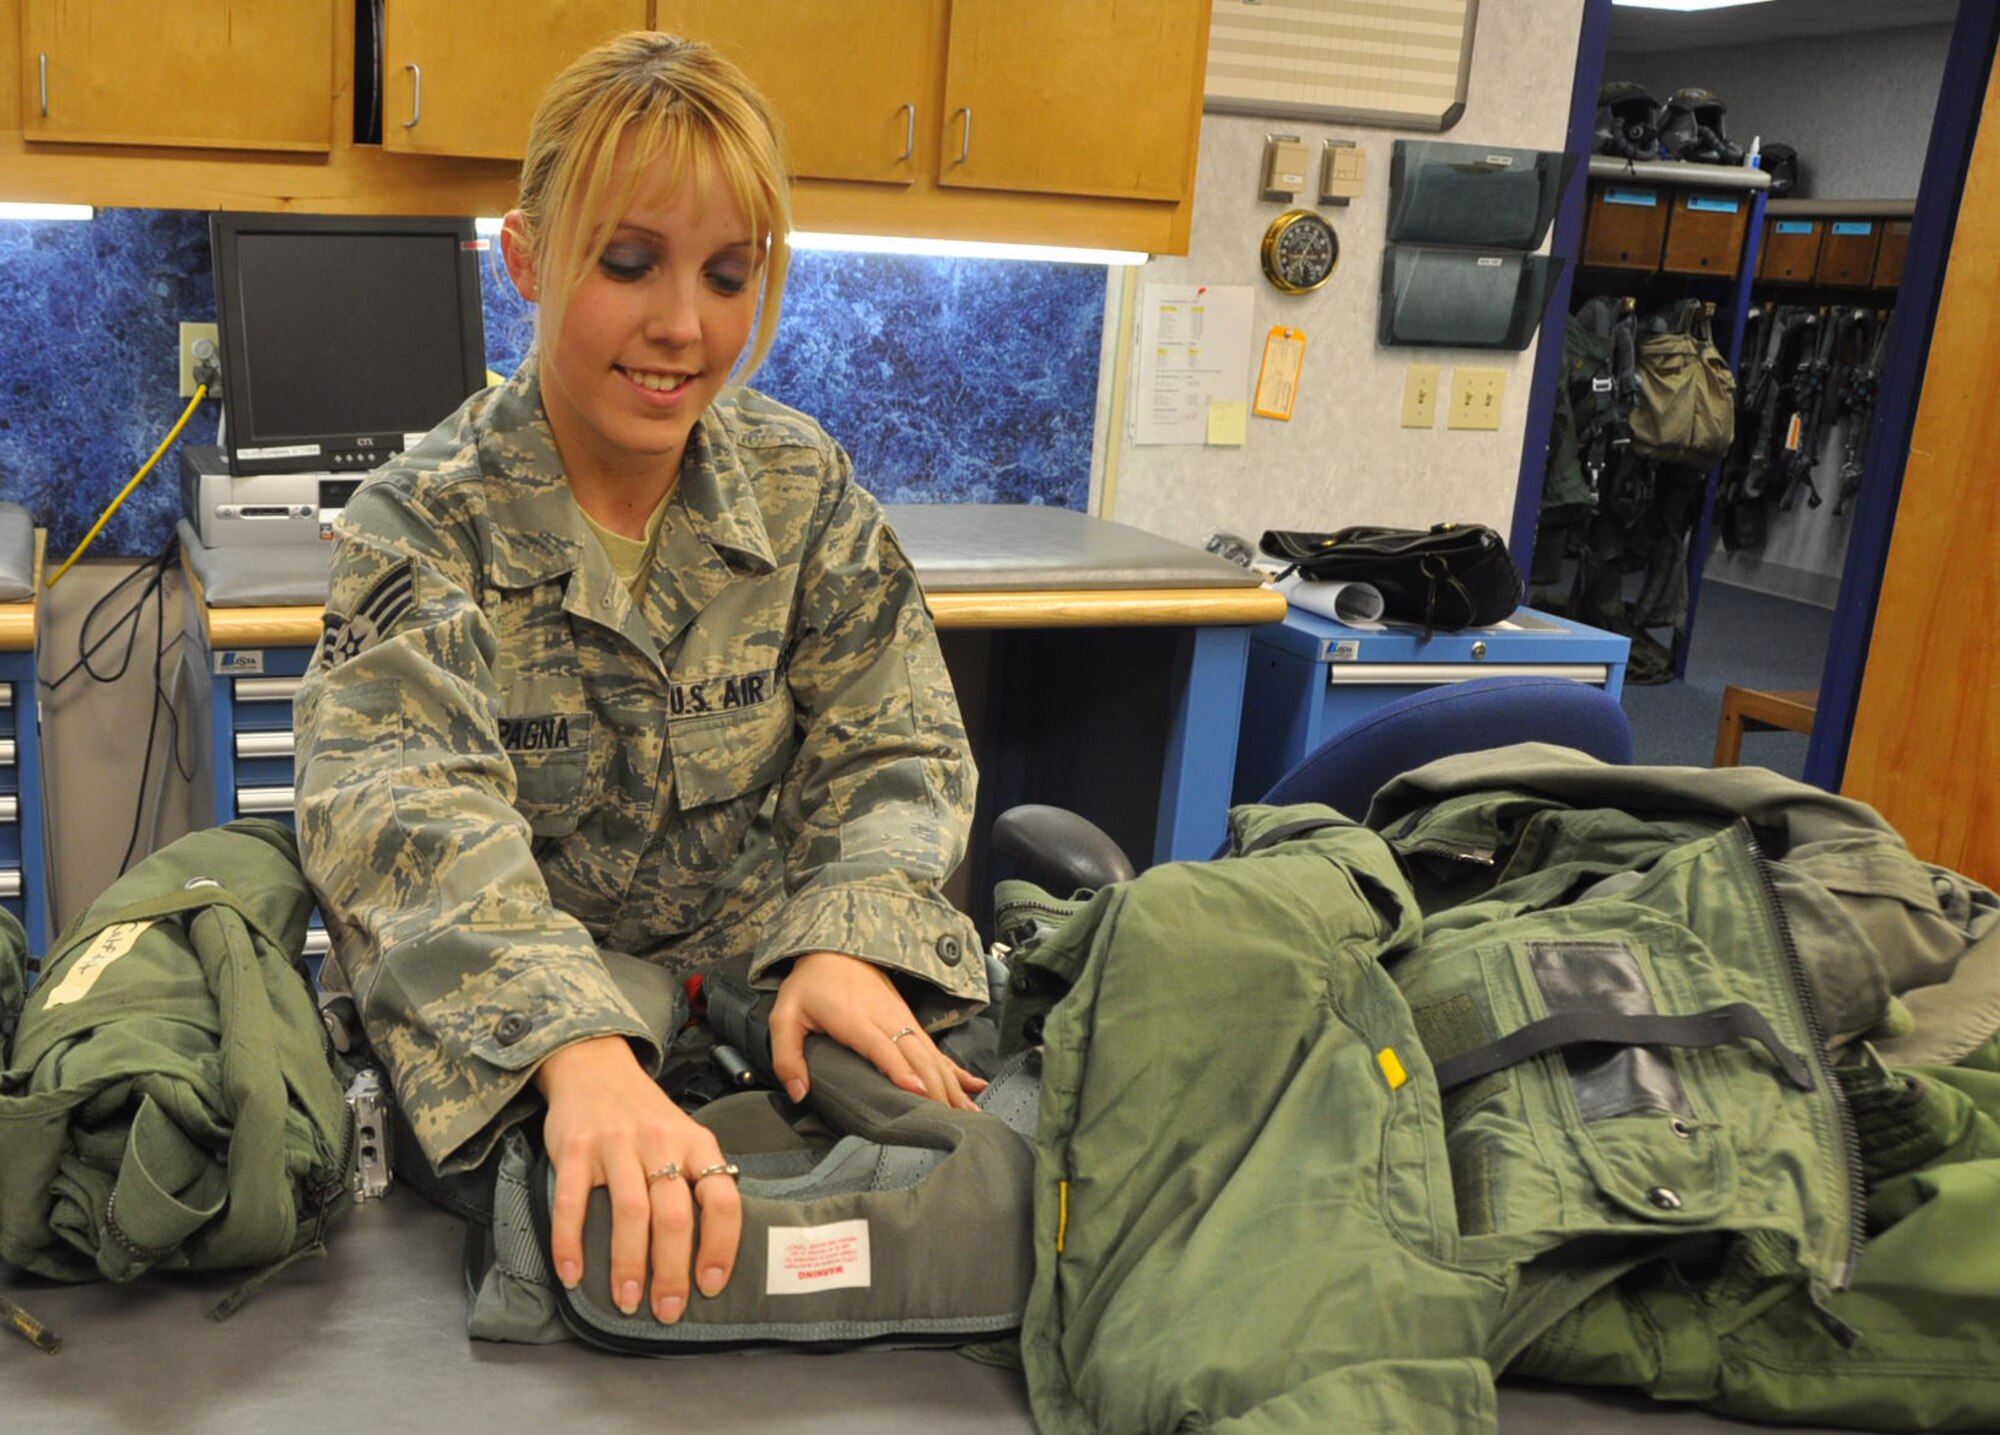 Senior Airman Kristen Campagna, 325th Operations Support Squadron Aircrew Flight Equipment journeyman, inspects a harness in preparation for flying March 12 at the 95th Fighter Squadron. (U.S. Air Force photo by Airman 1st Class Rachelle Elsea)